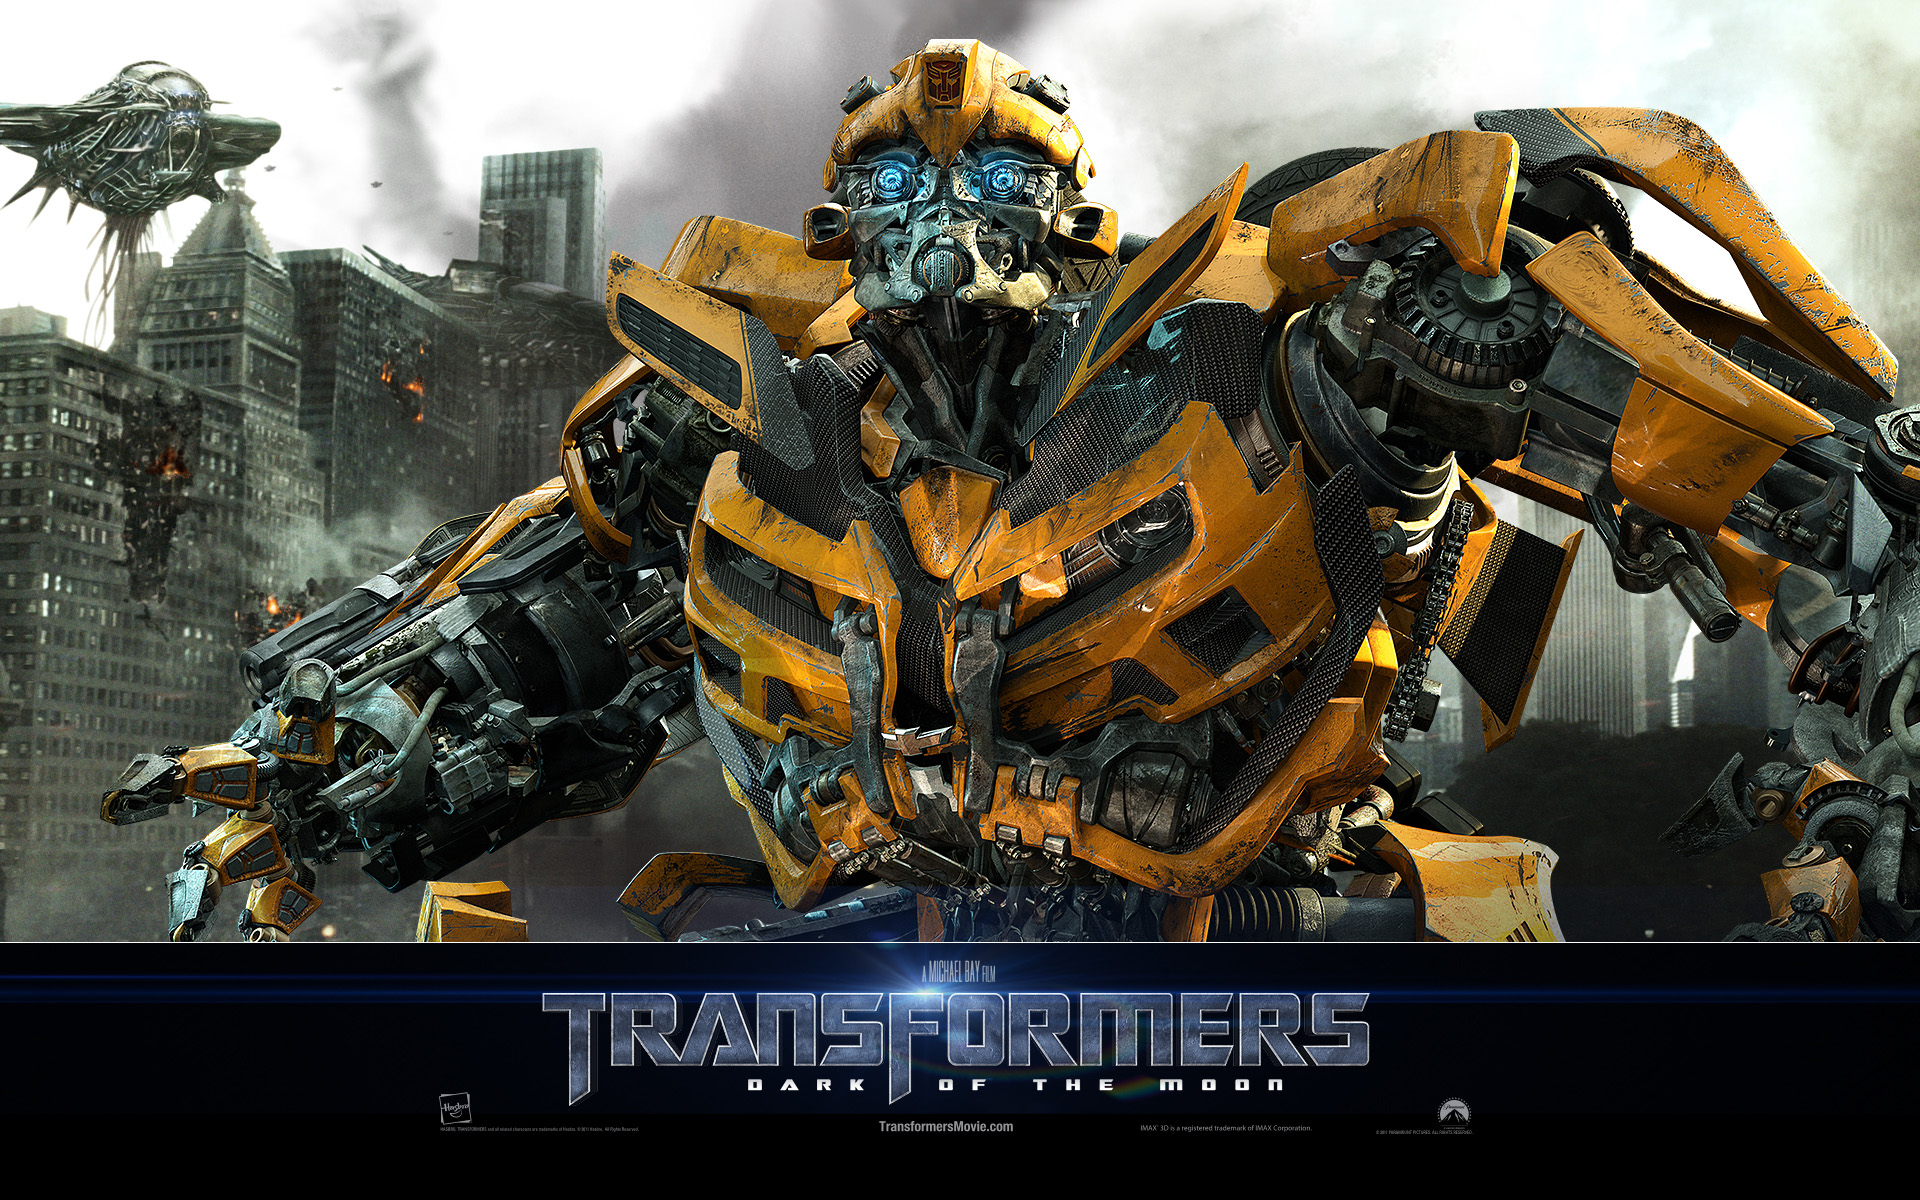 Transformers images Transformers wallpaper photos